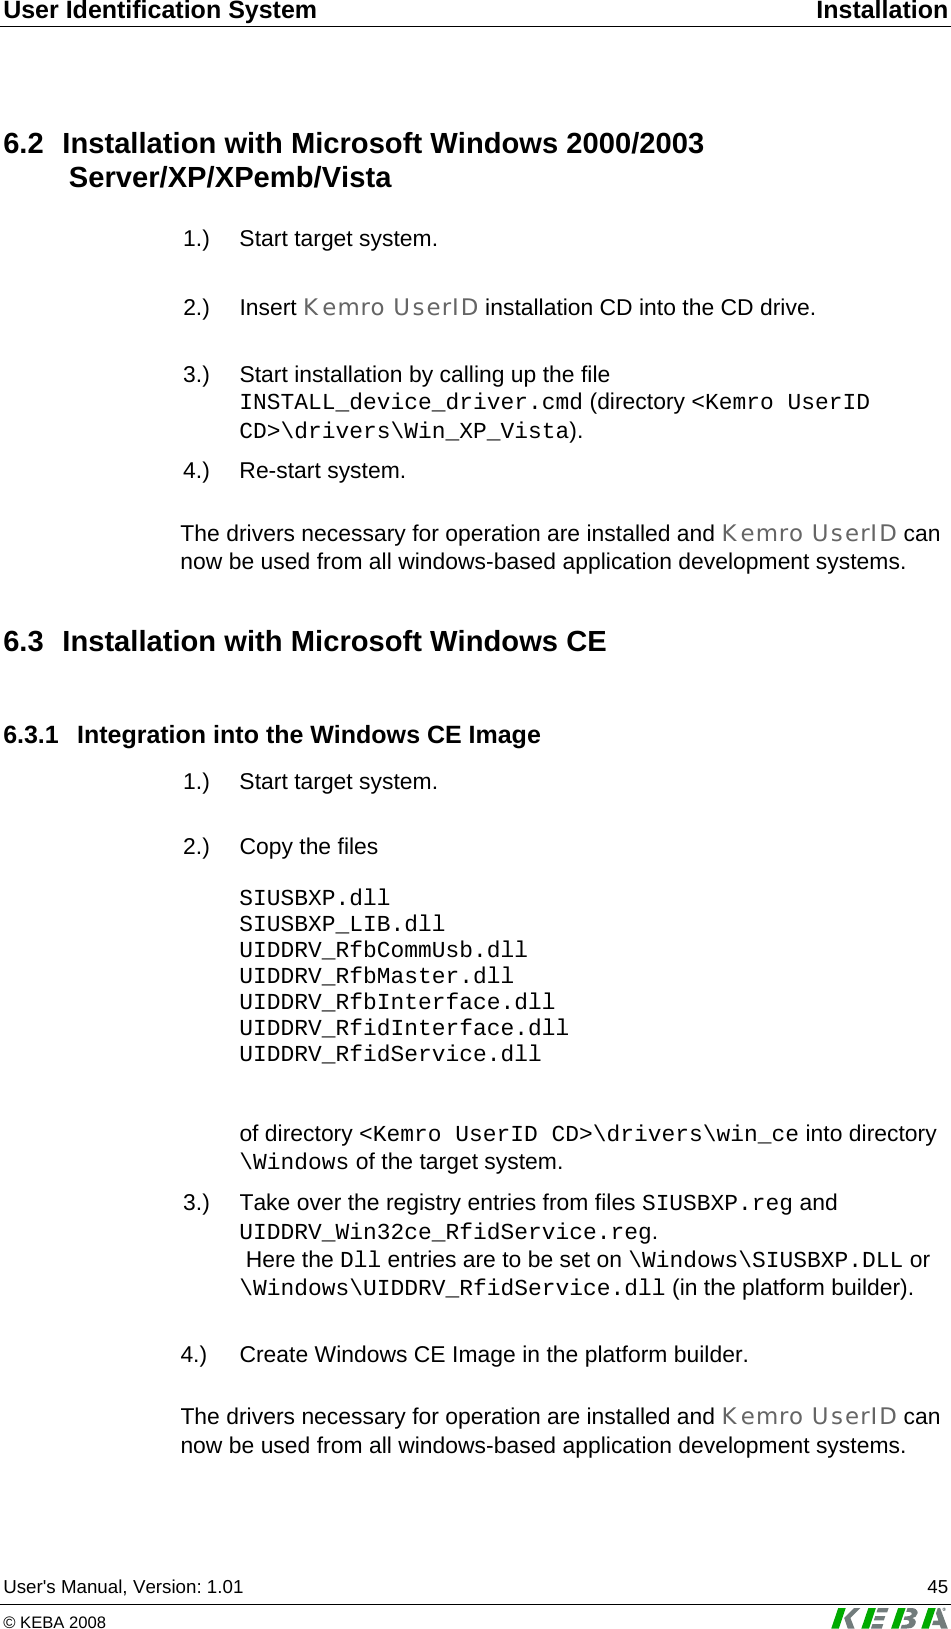 User Identification System  Installation User&apos;s Manual, Version: 1.01  45 © KEBA 2008   6.2  Installation with Microsoft Windows 2000/2003  Server/XP/XPemb/Vista  1.)  Start target system.   2.)  Insert  Kemro UserID installation CD into the CD drive.   3.)  Start installation by calling up the file INSTALL_device_driver.cmd (directory &lt;Kemro UserID CD&gt;\drivers\Win_XP_Vista).   4.)  Re-start  system.  The drivers necessary for operation are installed and Kemro UserID can now be used from all windows-based application development systems. 6.3  Installation with Microsoft Windows CE 6.3.1 Integration into the Windows CE Image  1.)  Start target system.   2.)  Copy the files  SIUSBXP.dll SIUSBXP_LIB.dll UIDDRV_RfbCommUsb.dll UIDDRV_RfbMaster.dll UIDDRV_RfbInterface.dll UIDDRV_RfidInterface.dll UIDDRV_RfidService.dll    of directory &lt;Kemro UserID CD&gt;\drivers\win_ce into directory \Windows of the target system.  3.)  Take over the registry entries from files SIUSBXP.reg and  UIDDRV_Win32ce_RfidService.reg.  Here the Dll entries are to be set on \Windows\SIUSBXP.DLL or \Windows\UIDDRV_RfidService.dll (in the platform builder).  4.)   Create Windows CE Image in the platform builder.  The drivers necessary for operation are installed and Kemro UserID can now be used from all windows-based application development systems. 